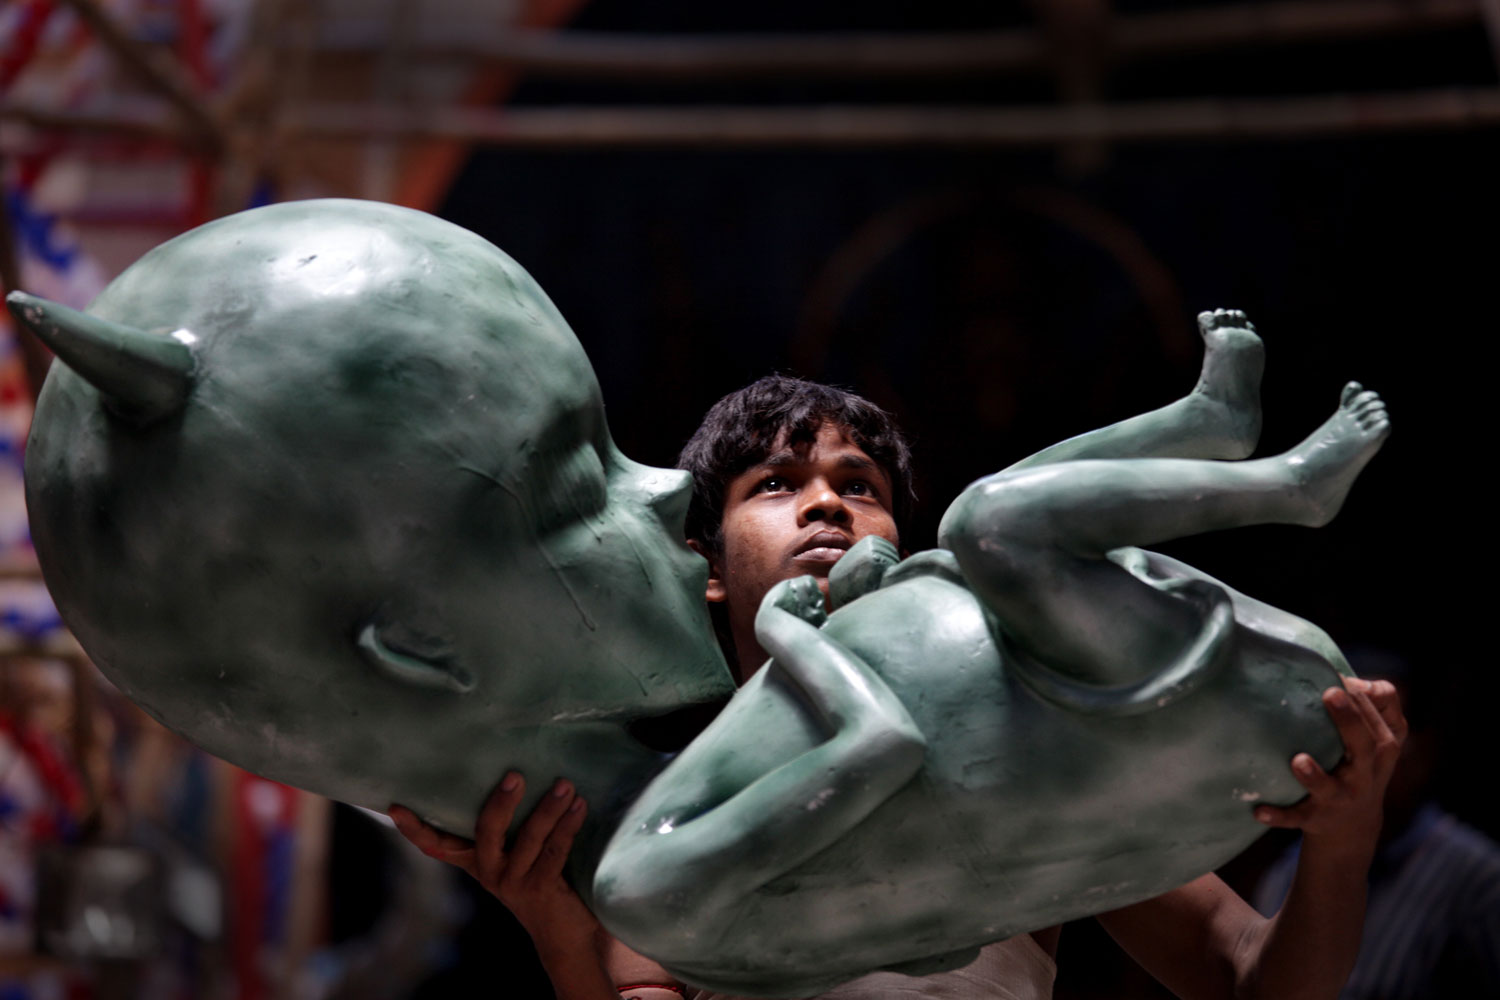 Oct. 12, 2012. An element of a Goddess Durga idol representing an embryo of demon is installed by Indian artist Mukunda Mondal at a makeshift pandal in Calcutta, India, ahead of the Durga Puja festival.